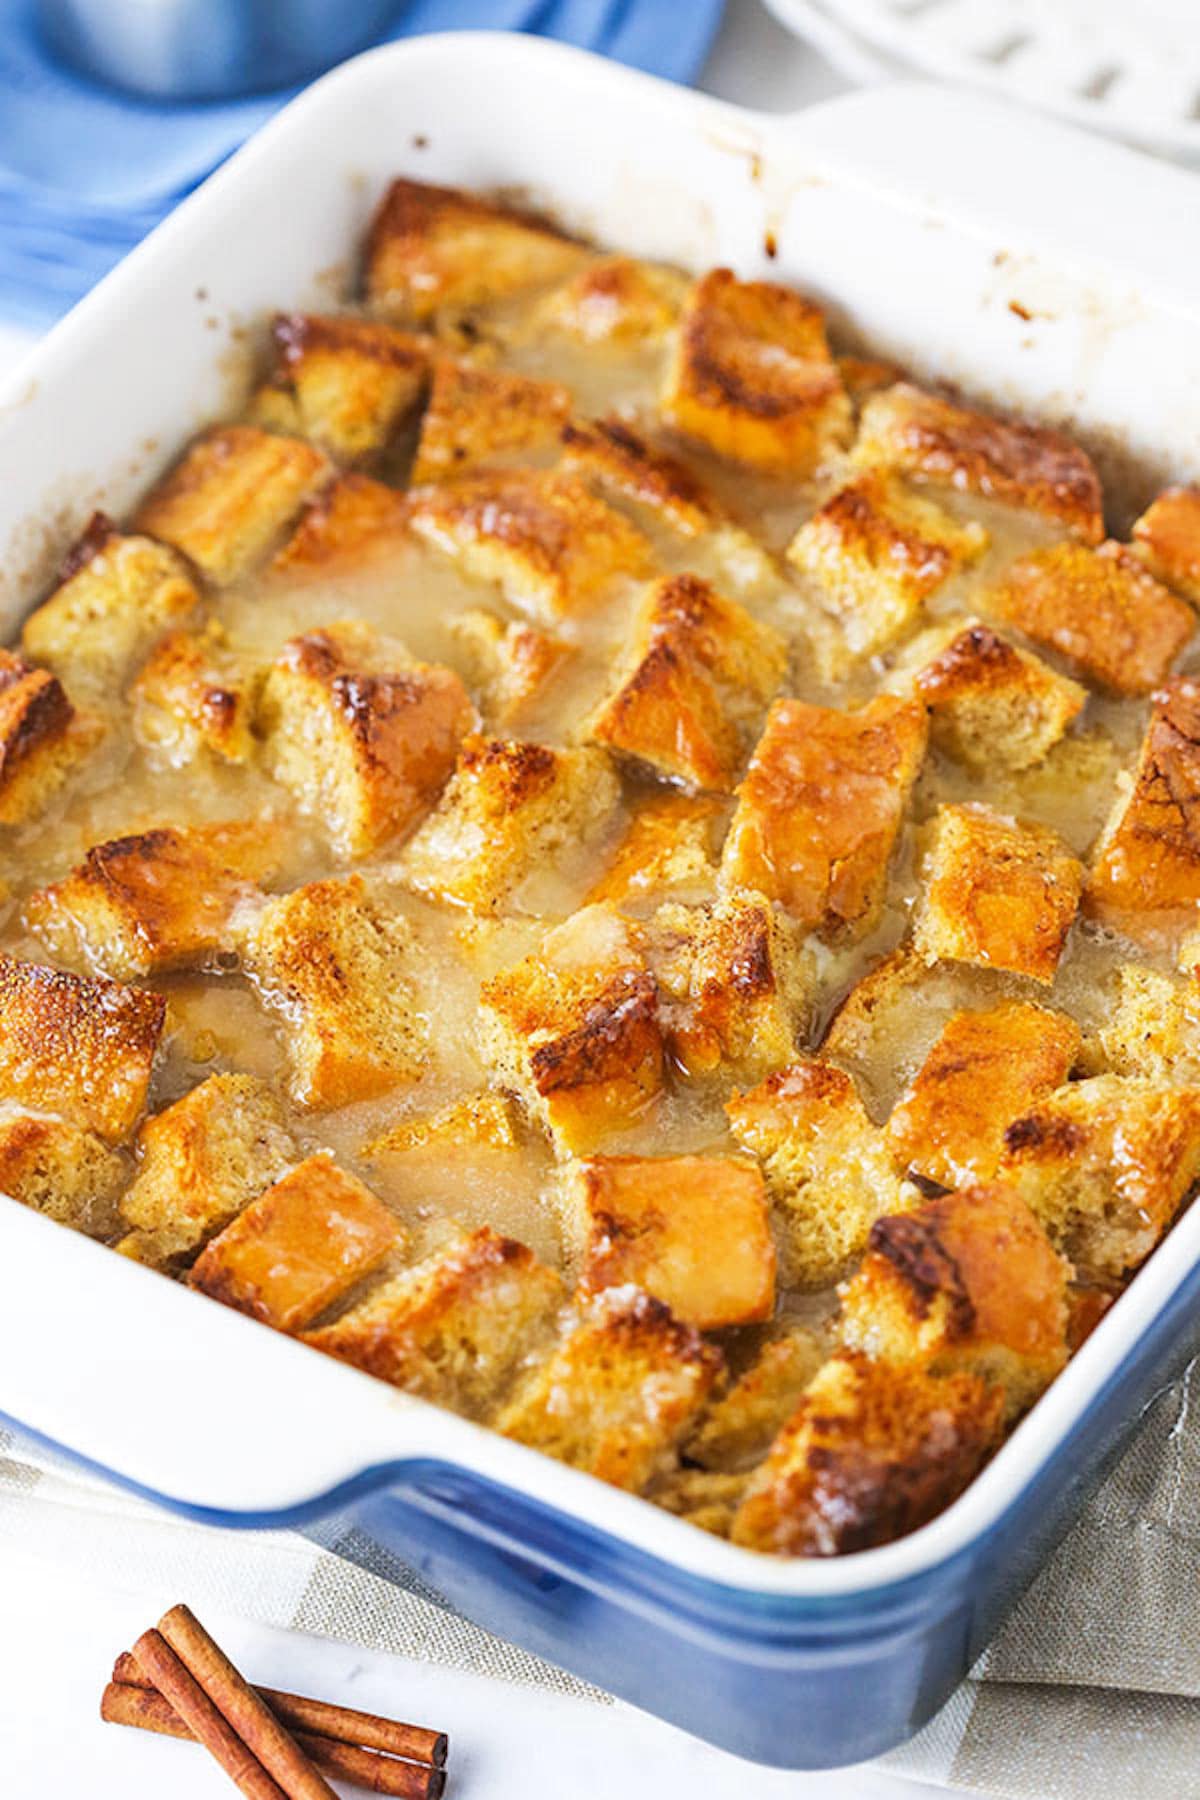 Homemade bread pudding in a white and blue pan.